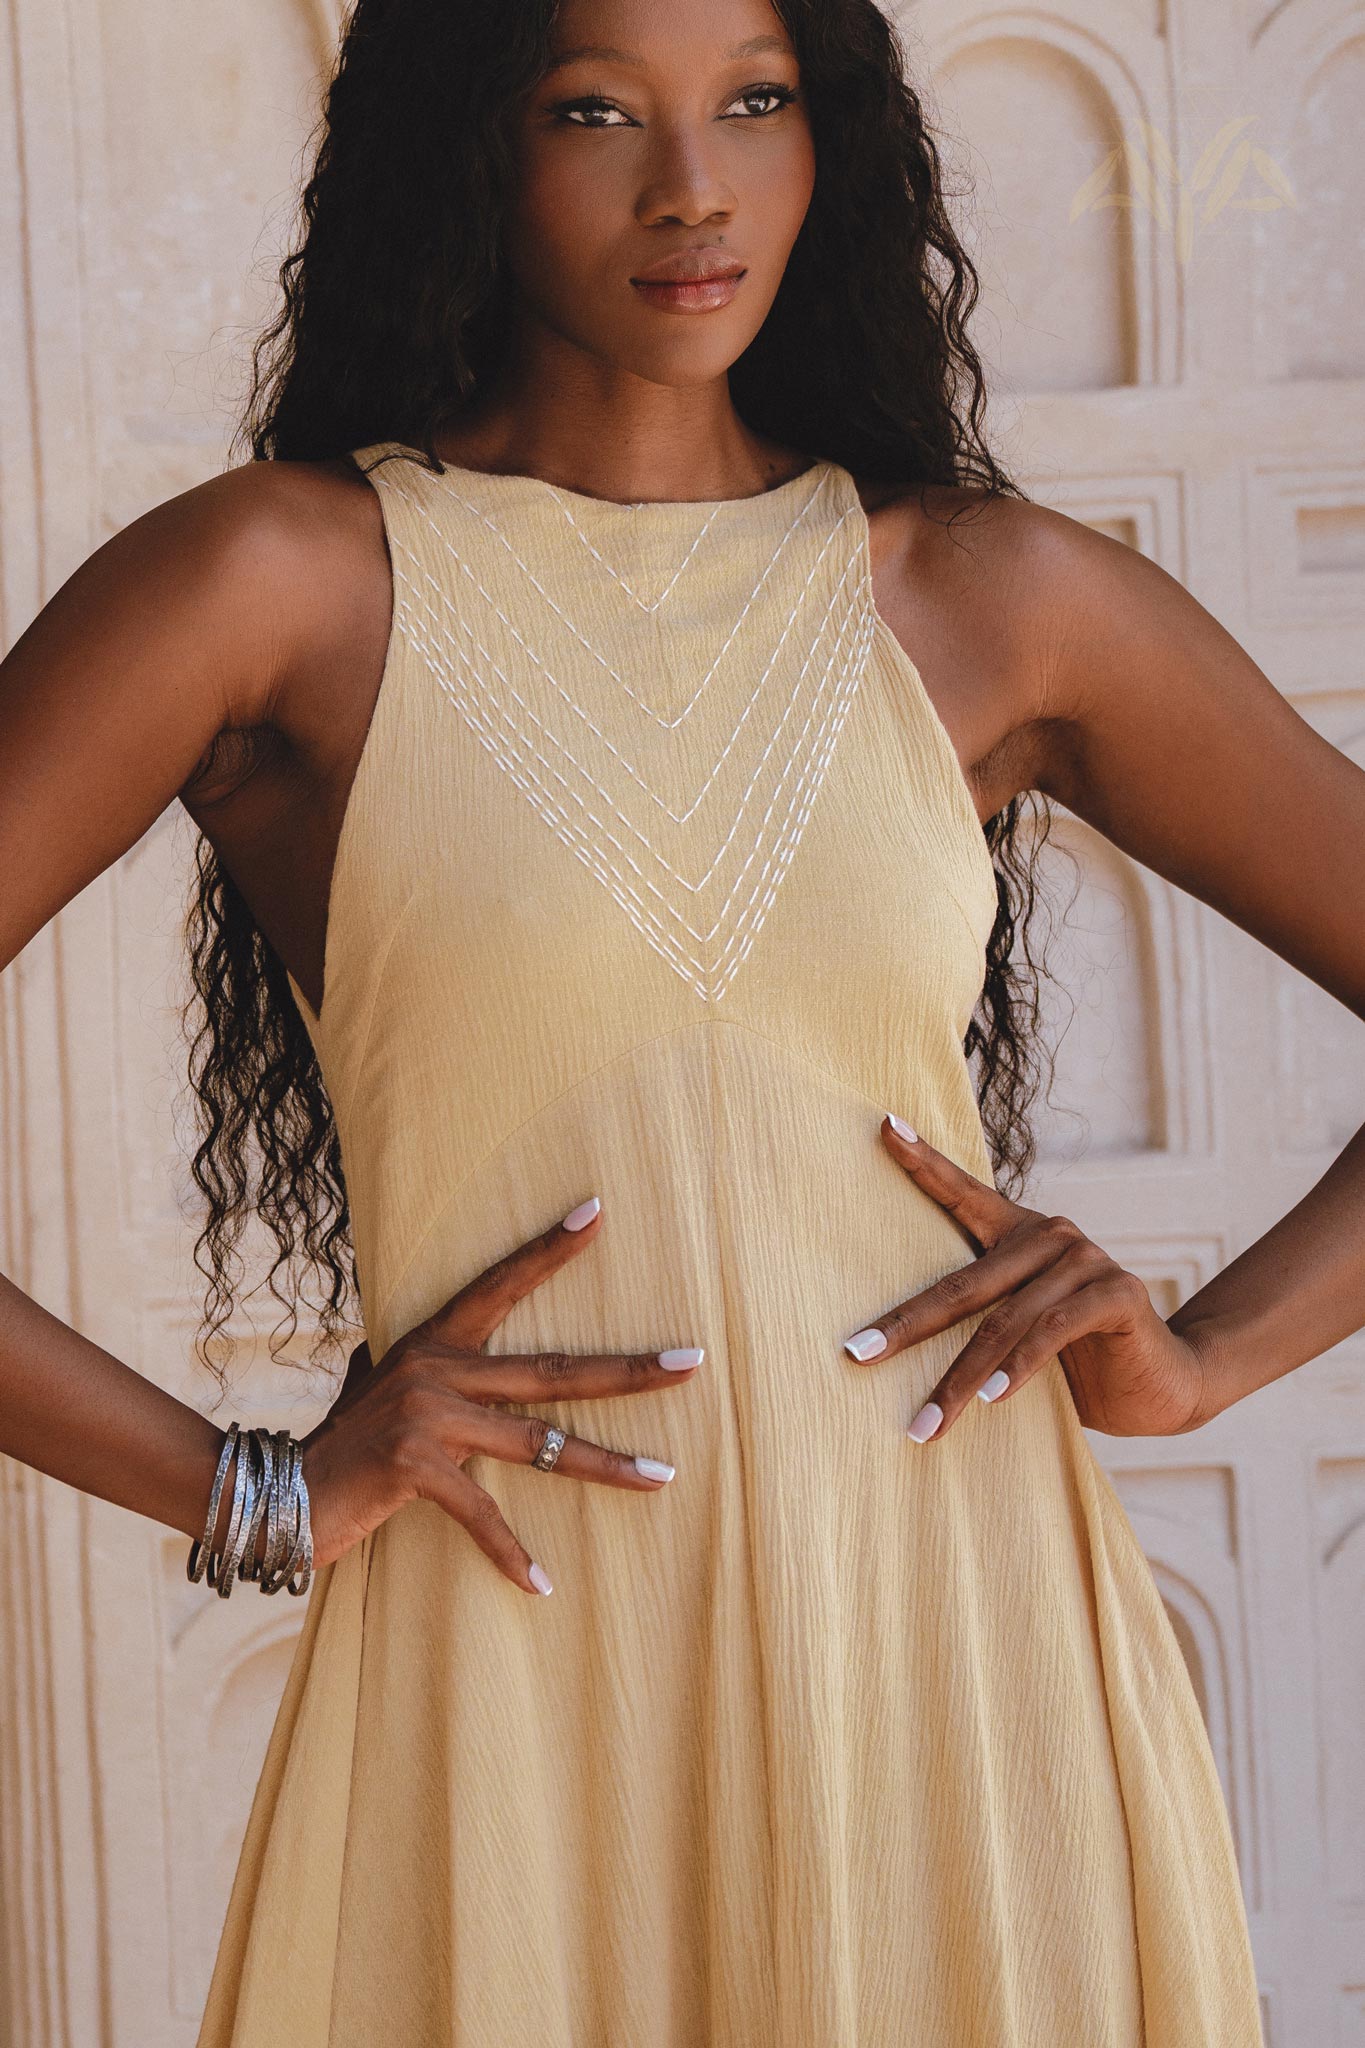 Hand-embroidered Gold Goddess Dress with small jingle bells, inspired by Indian culture. Lightweight, organic, and adorned with a unique ombré effect.